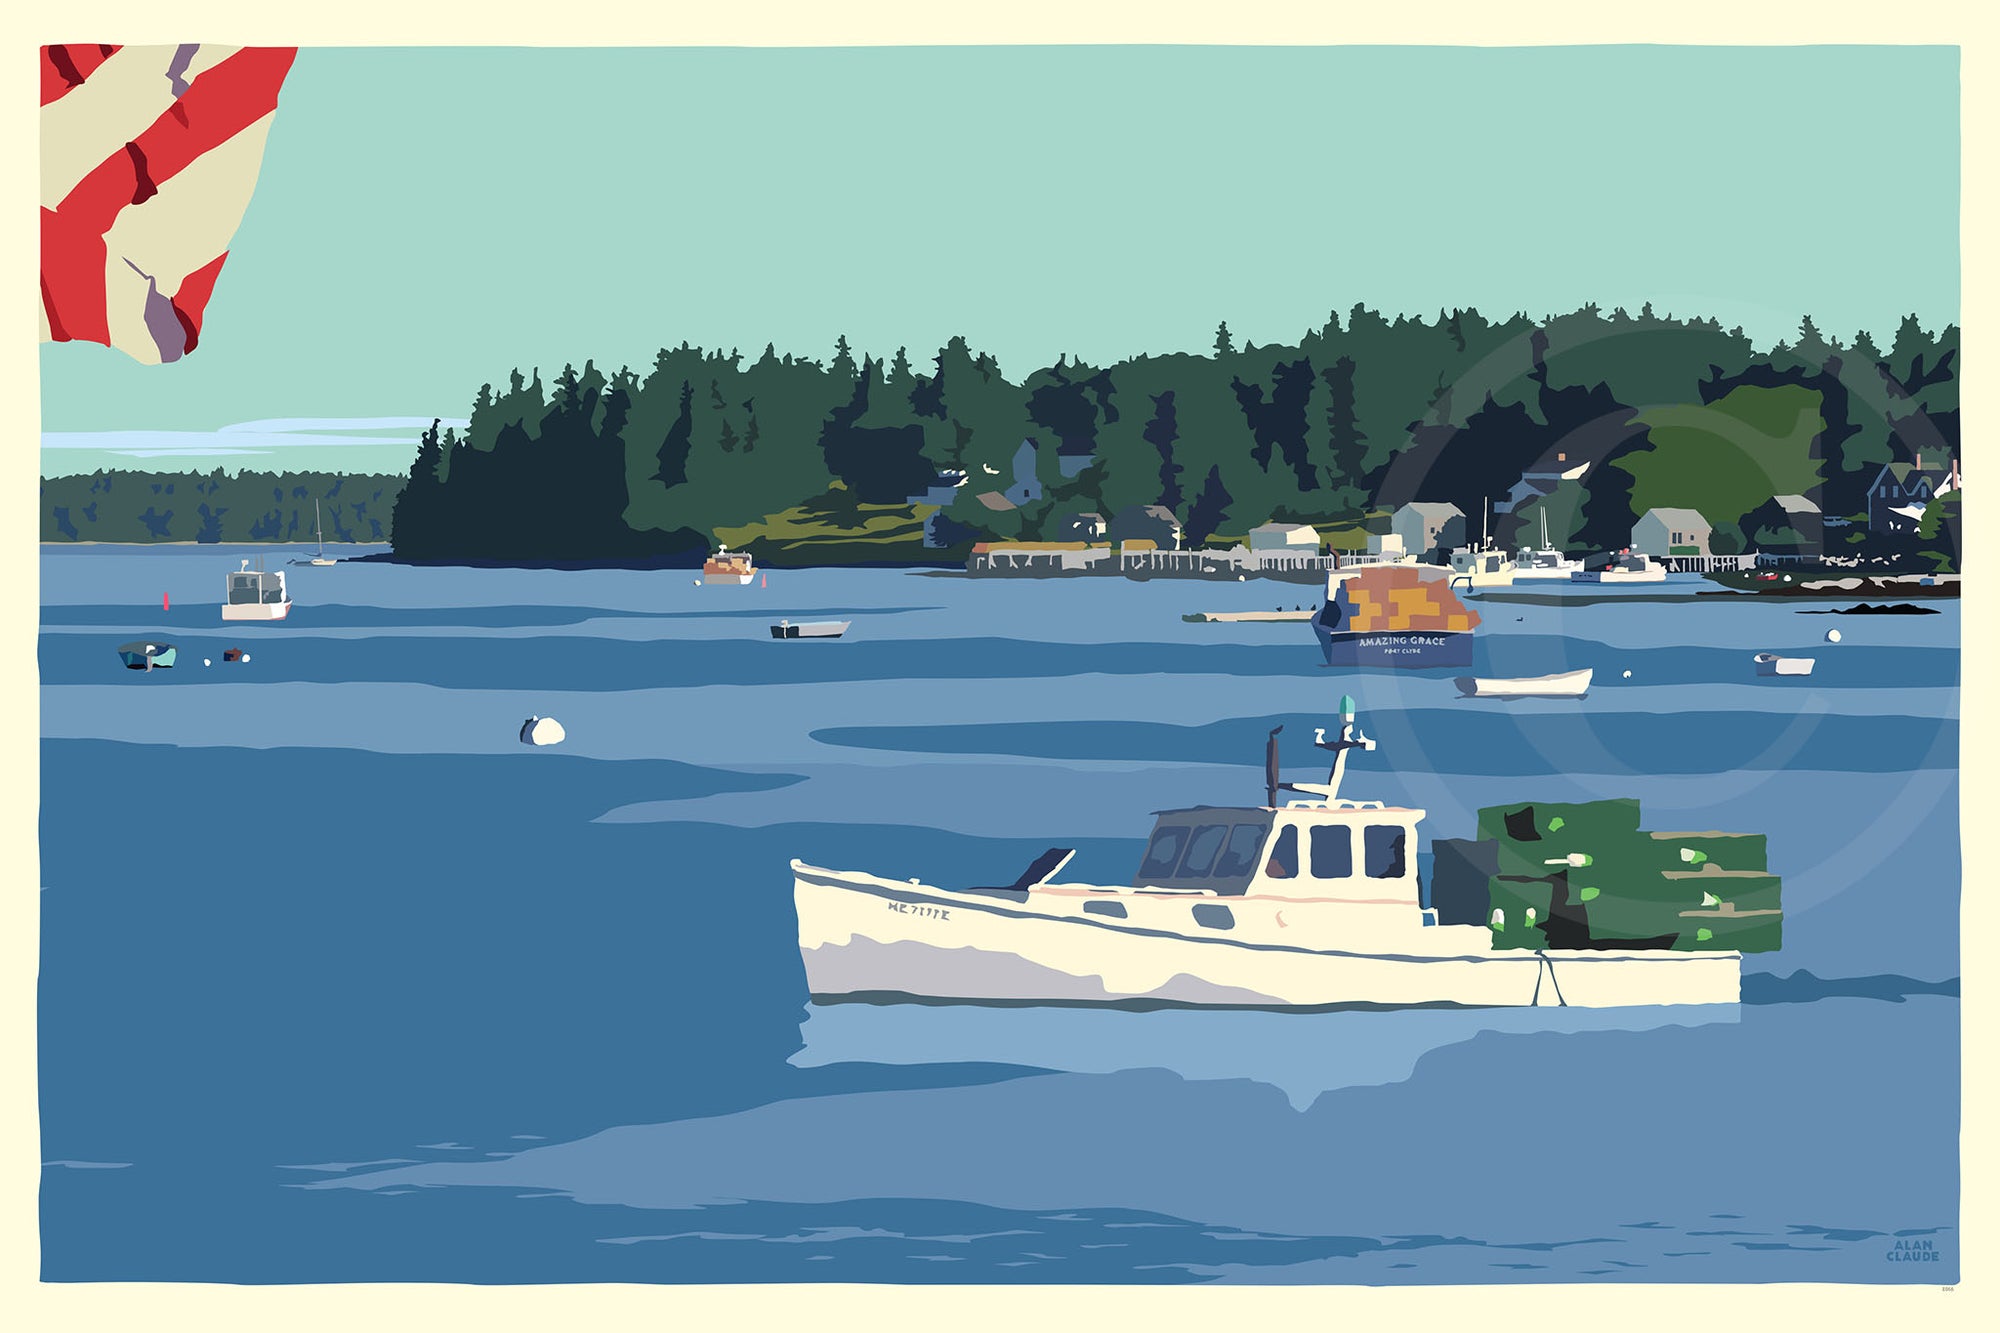 Port Clyde Lobster Boat Art Print 24" x 36" Wall Poster By Alan Claude - Maine